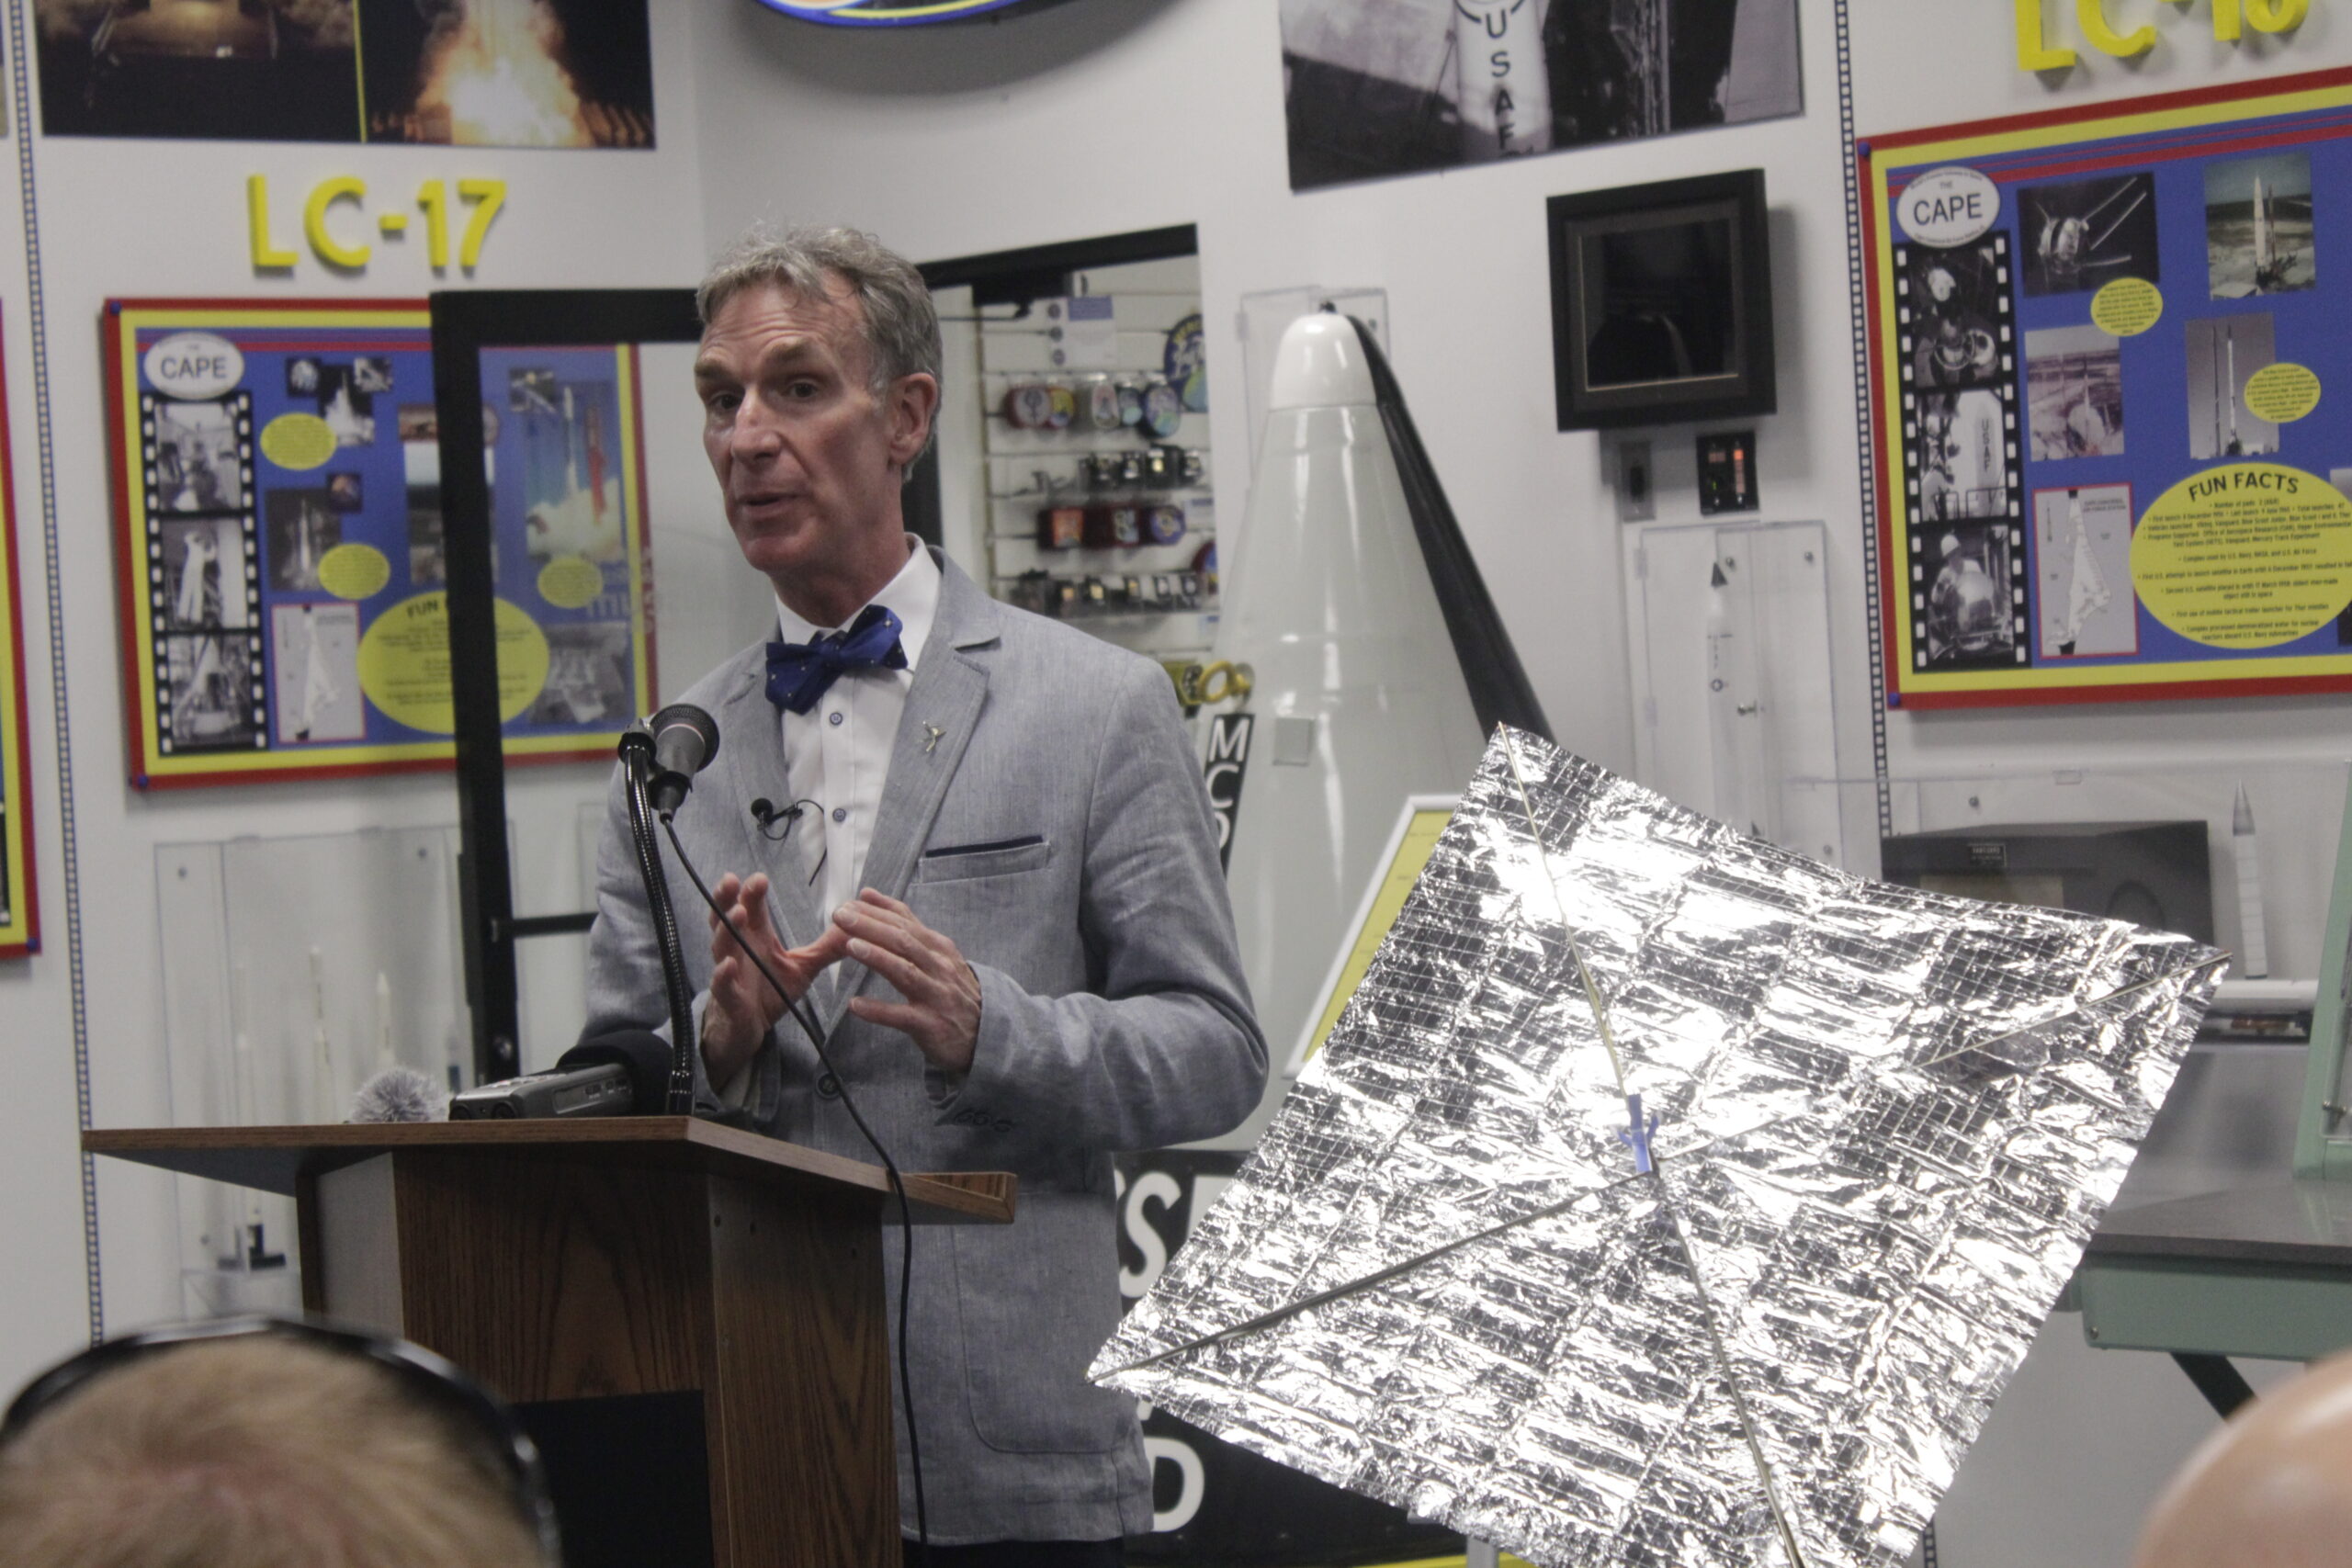 ‘The Science Guy’ Talks About His Space Sail